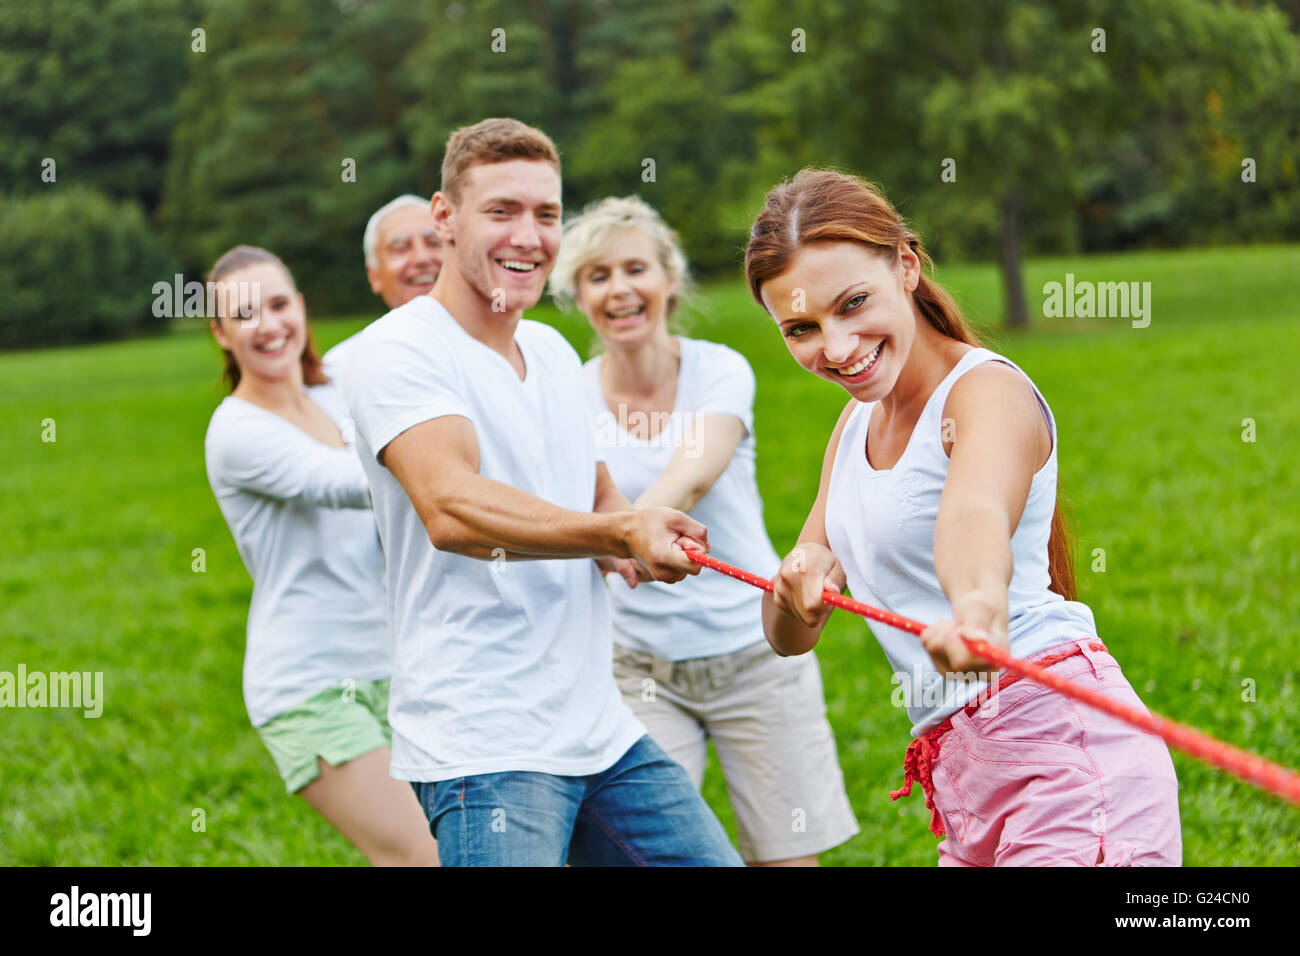 Strong group in a competition playing tug of war Stock Photo